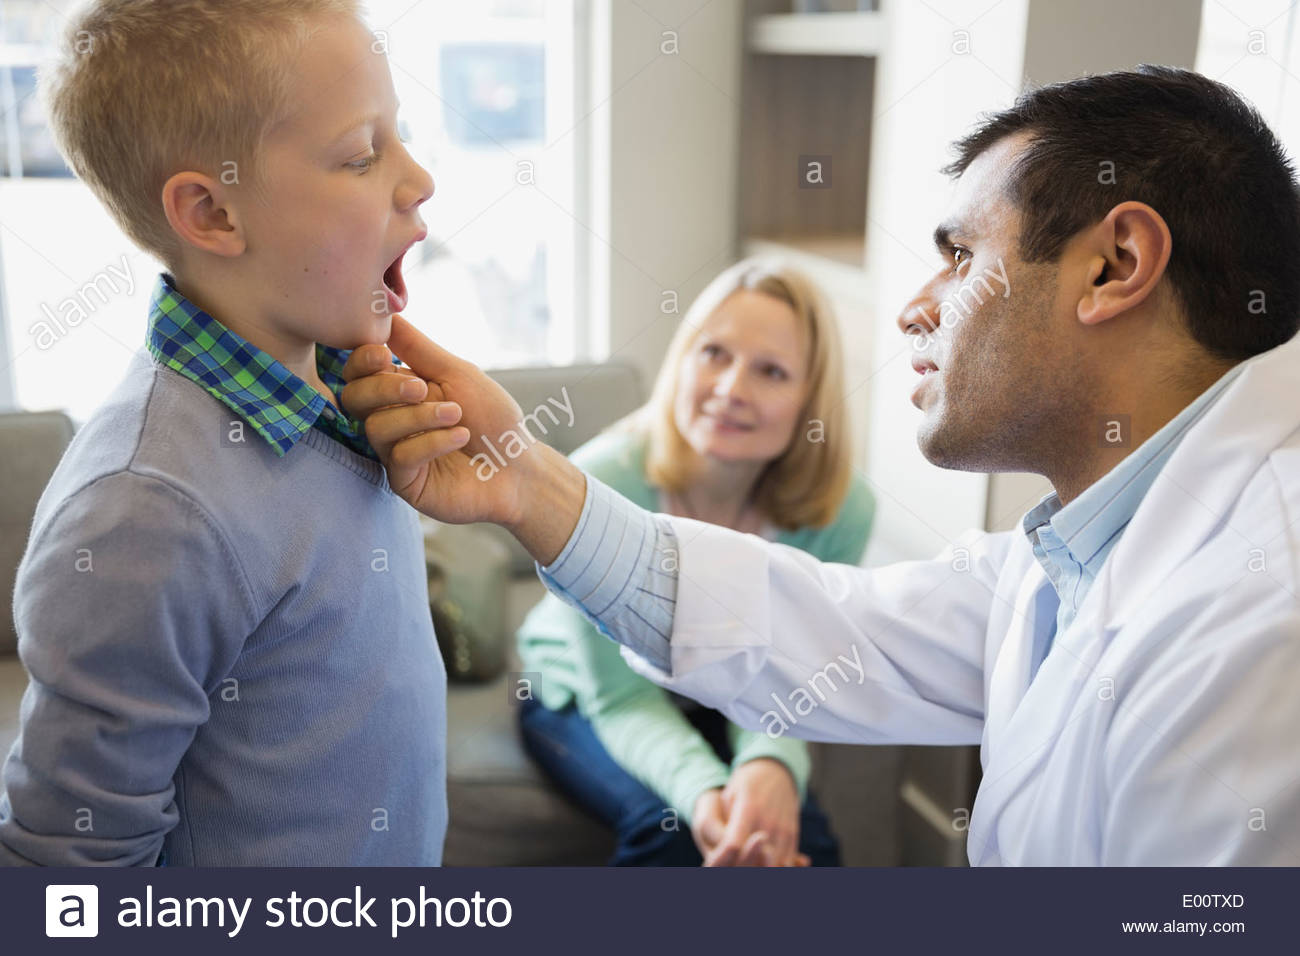 Dentist looking into boys mouth Stock Photo